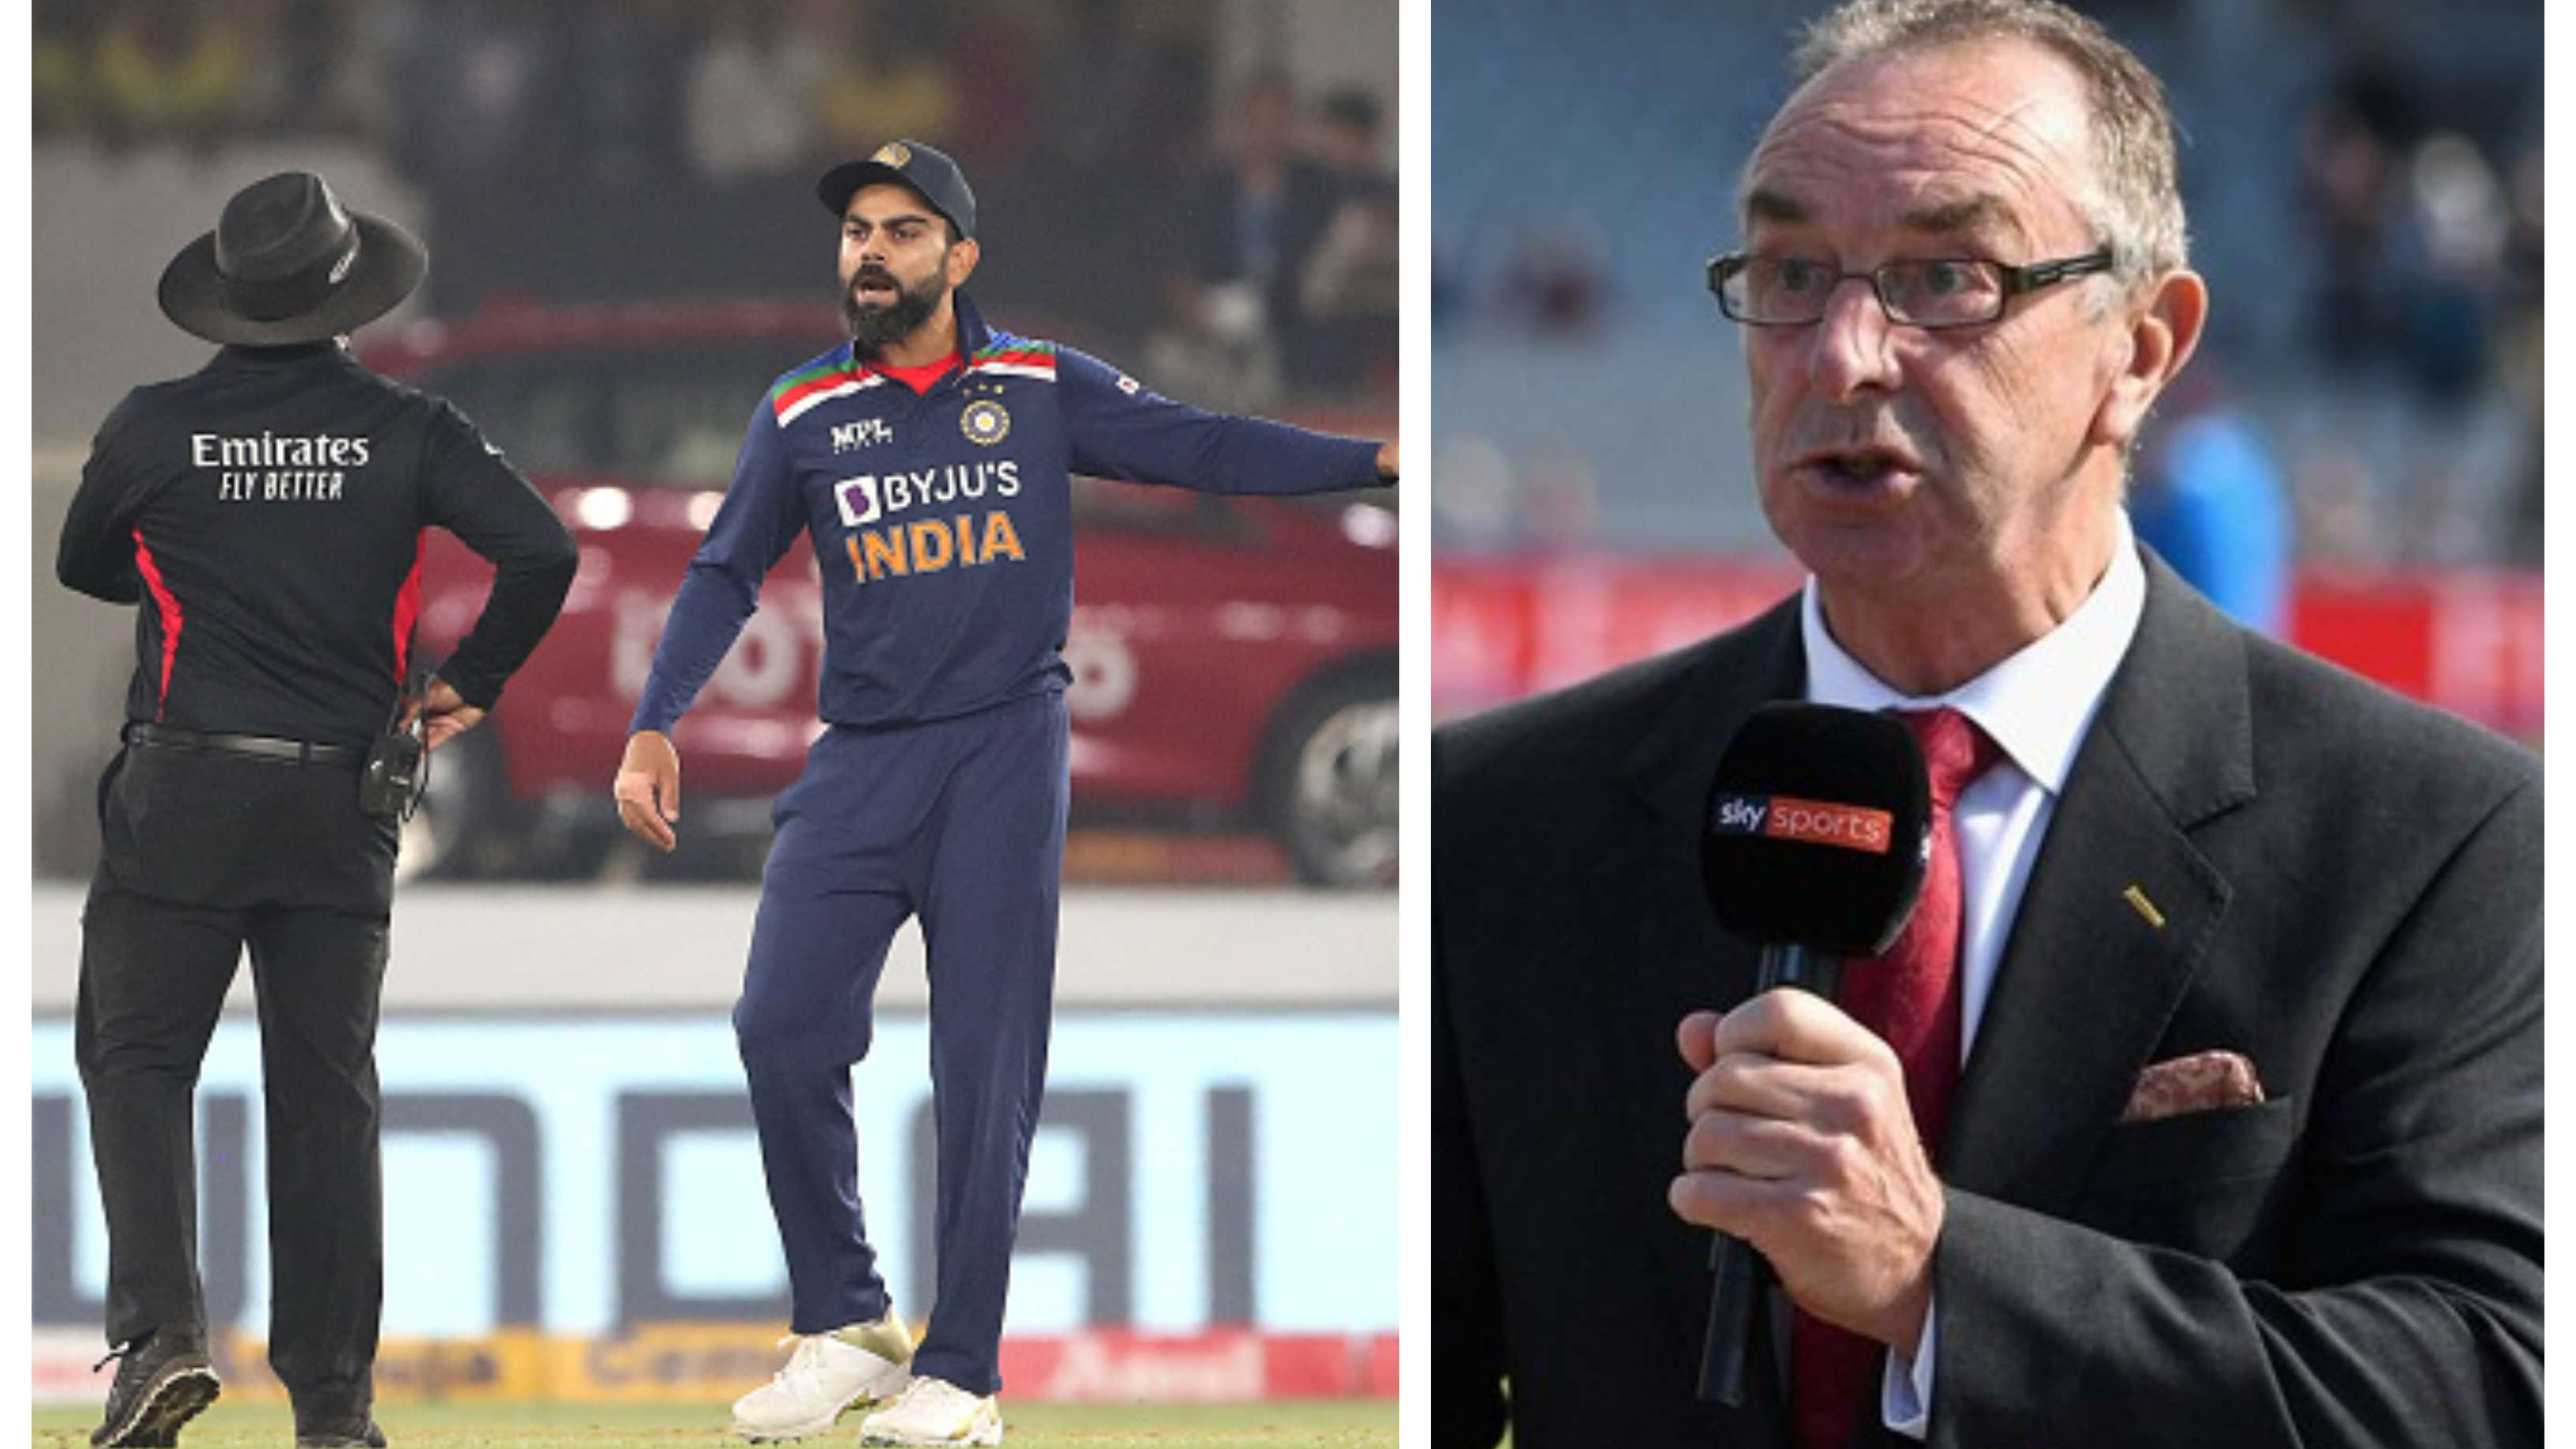 IND v ENG 2021: Virat Kohli has been “pressuring, disrespecting” umpires in the ongoing series, claims David Lloyd